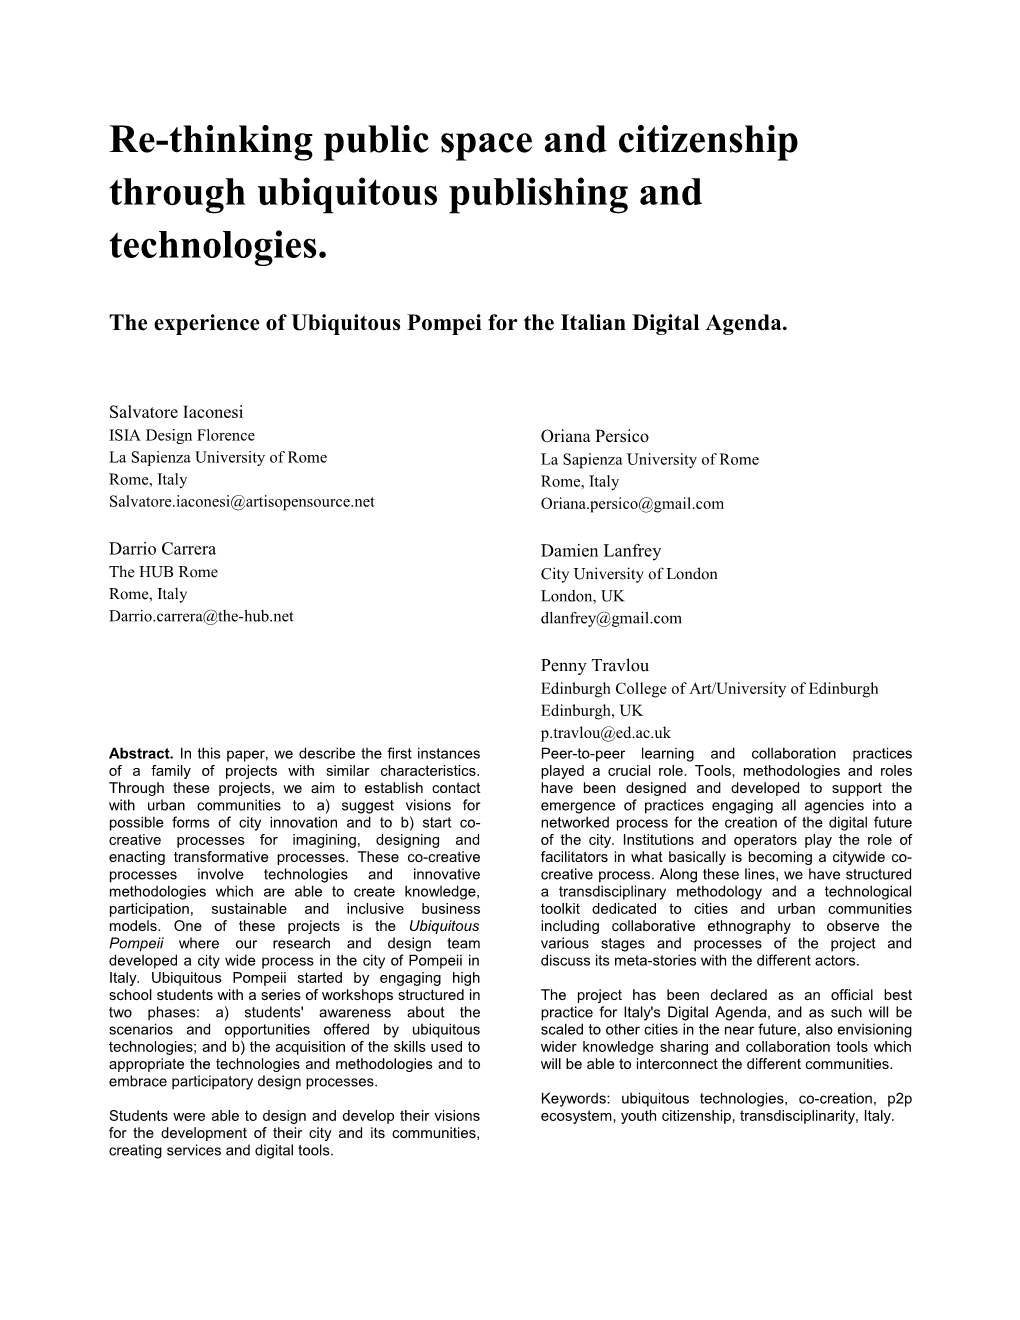 Re-Thinking Public Space and Citizenship Through Ubiquitous Publishing and Technologies